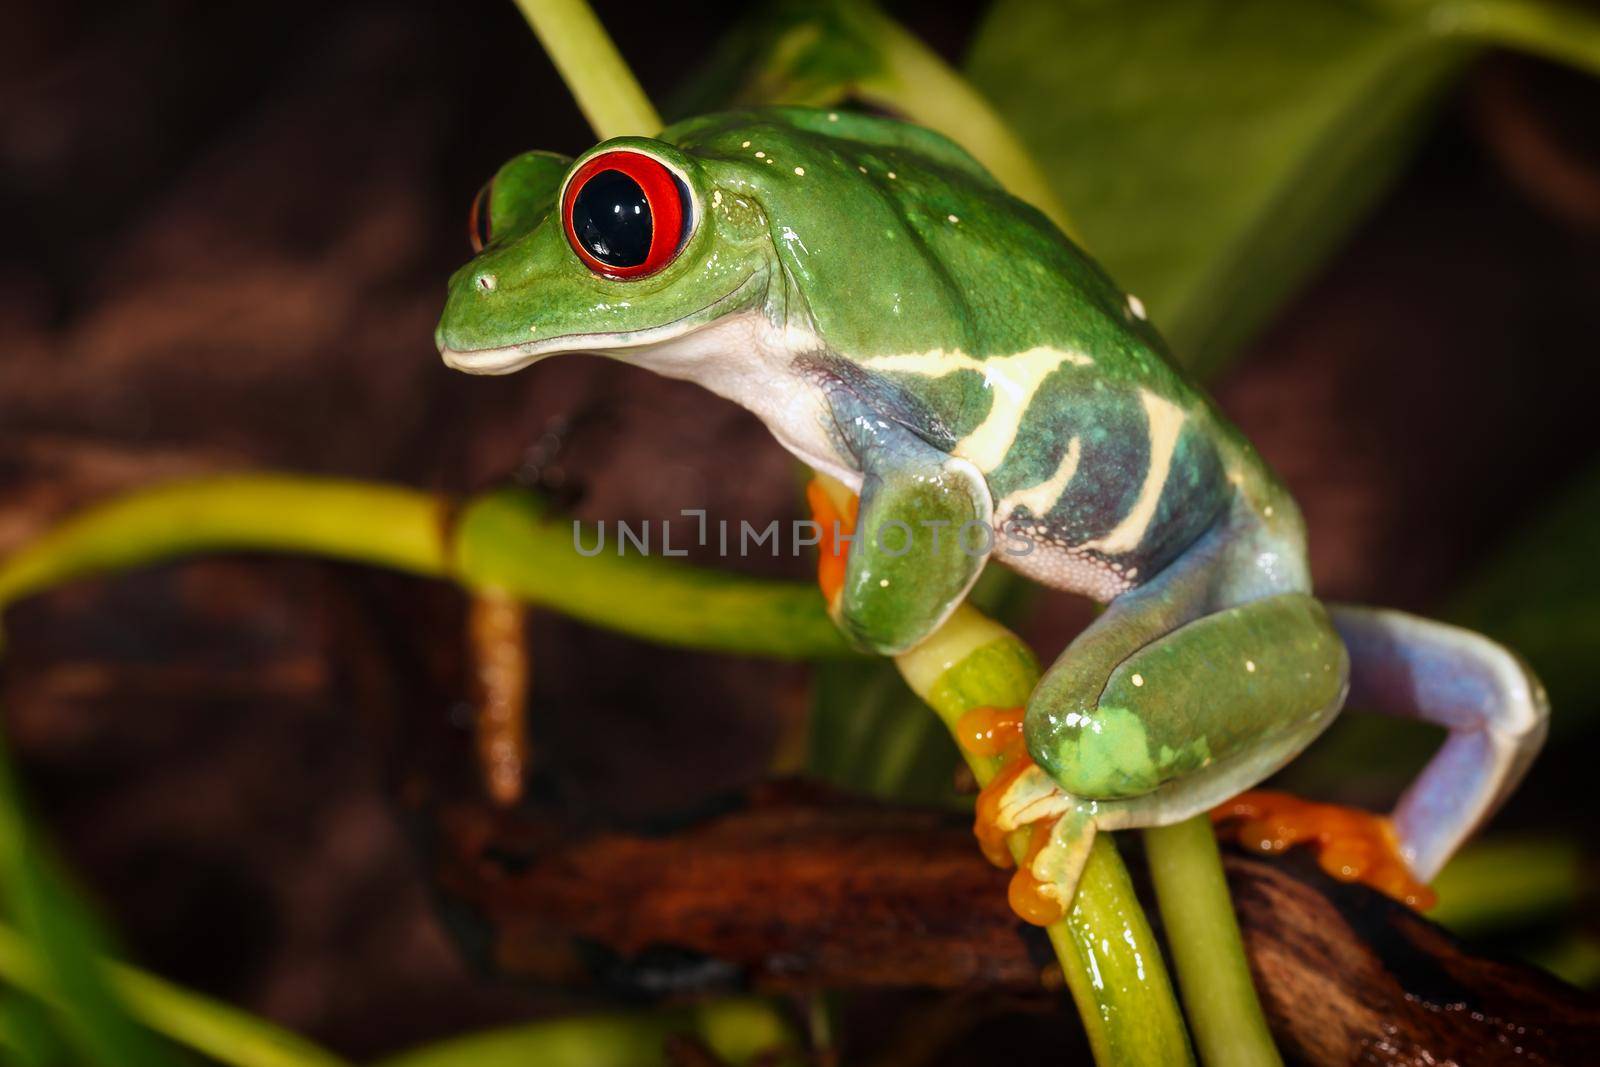 Red eyed tree frog climbs on the plant mast and looking down